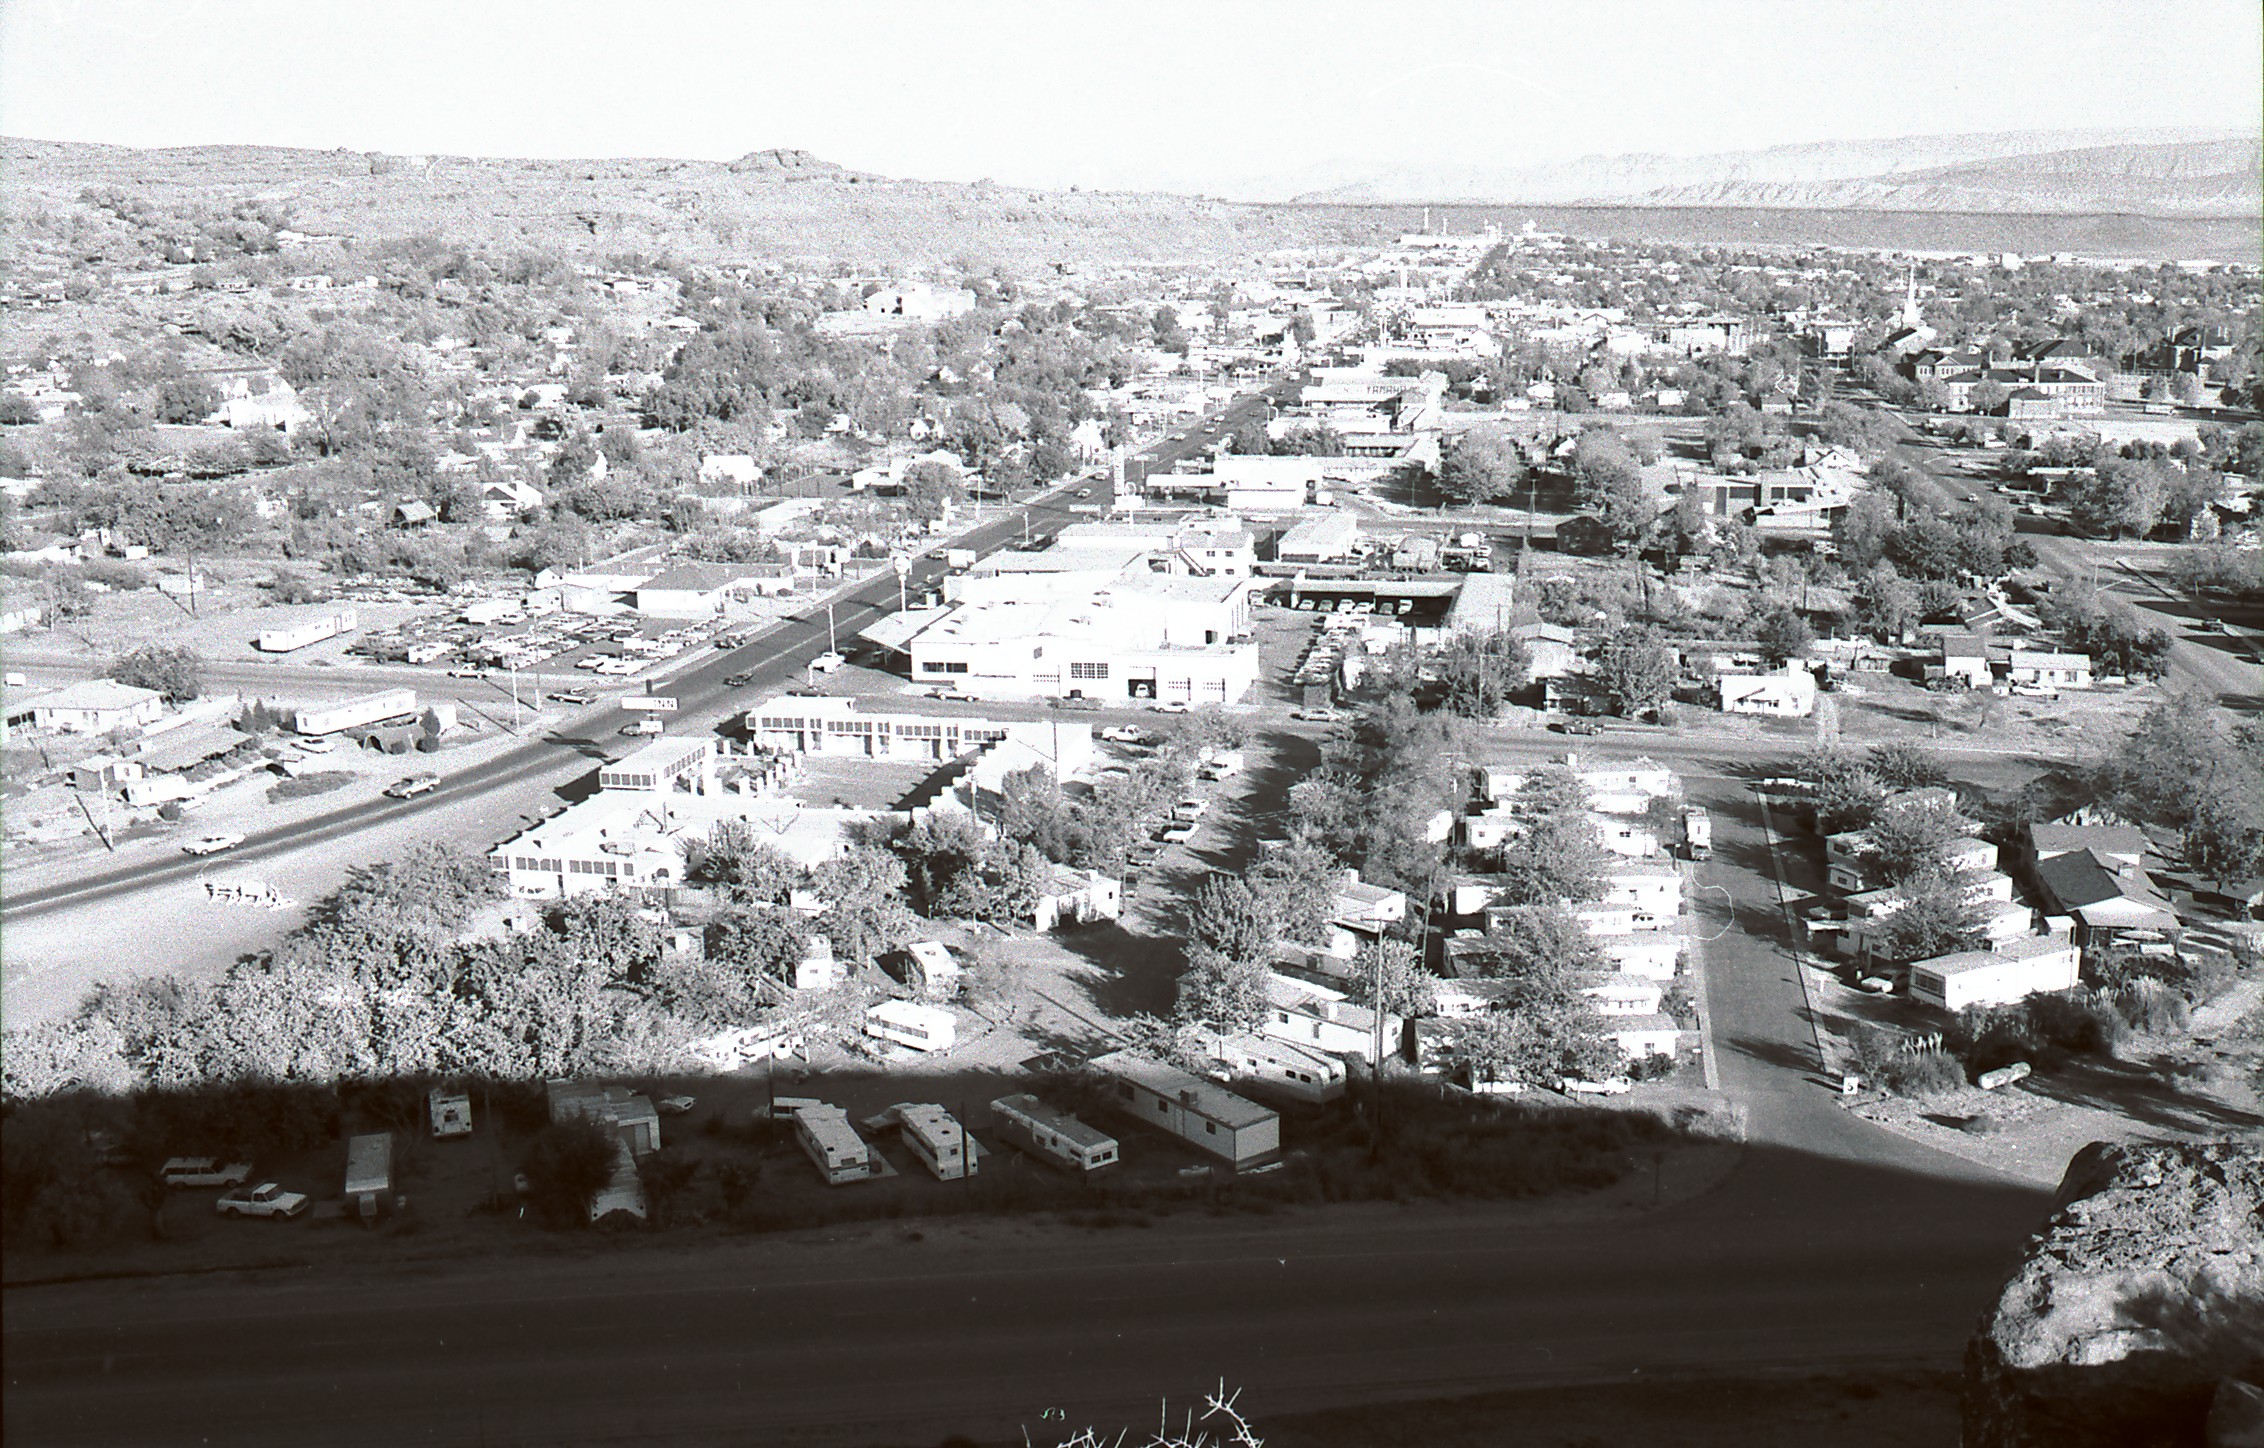 Downtown St. George